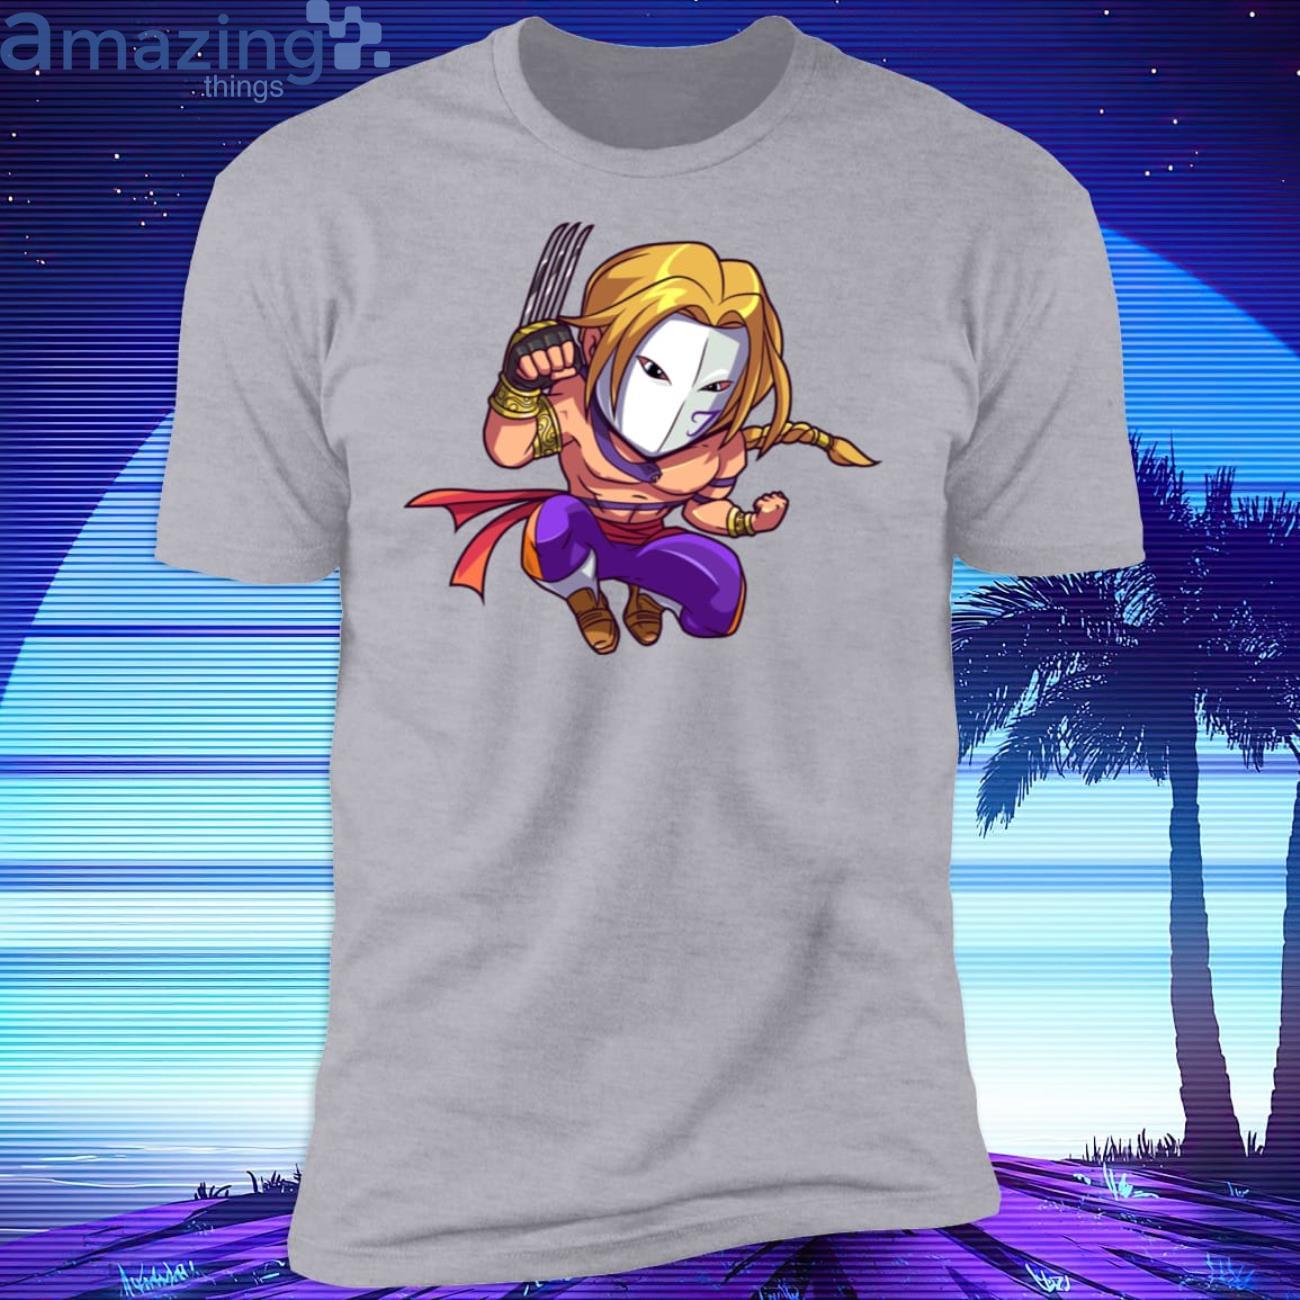 Street Fighter V': Vega Debuts, With A Shirt